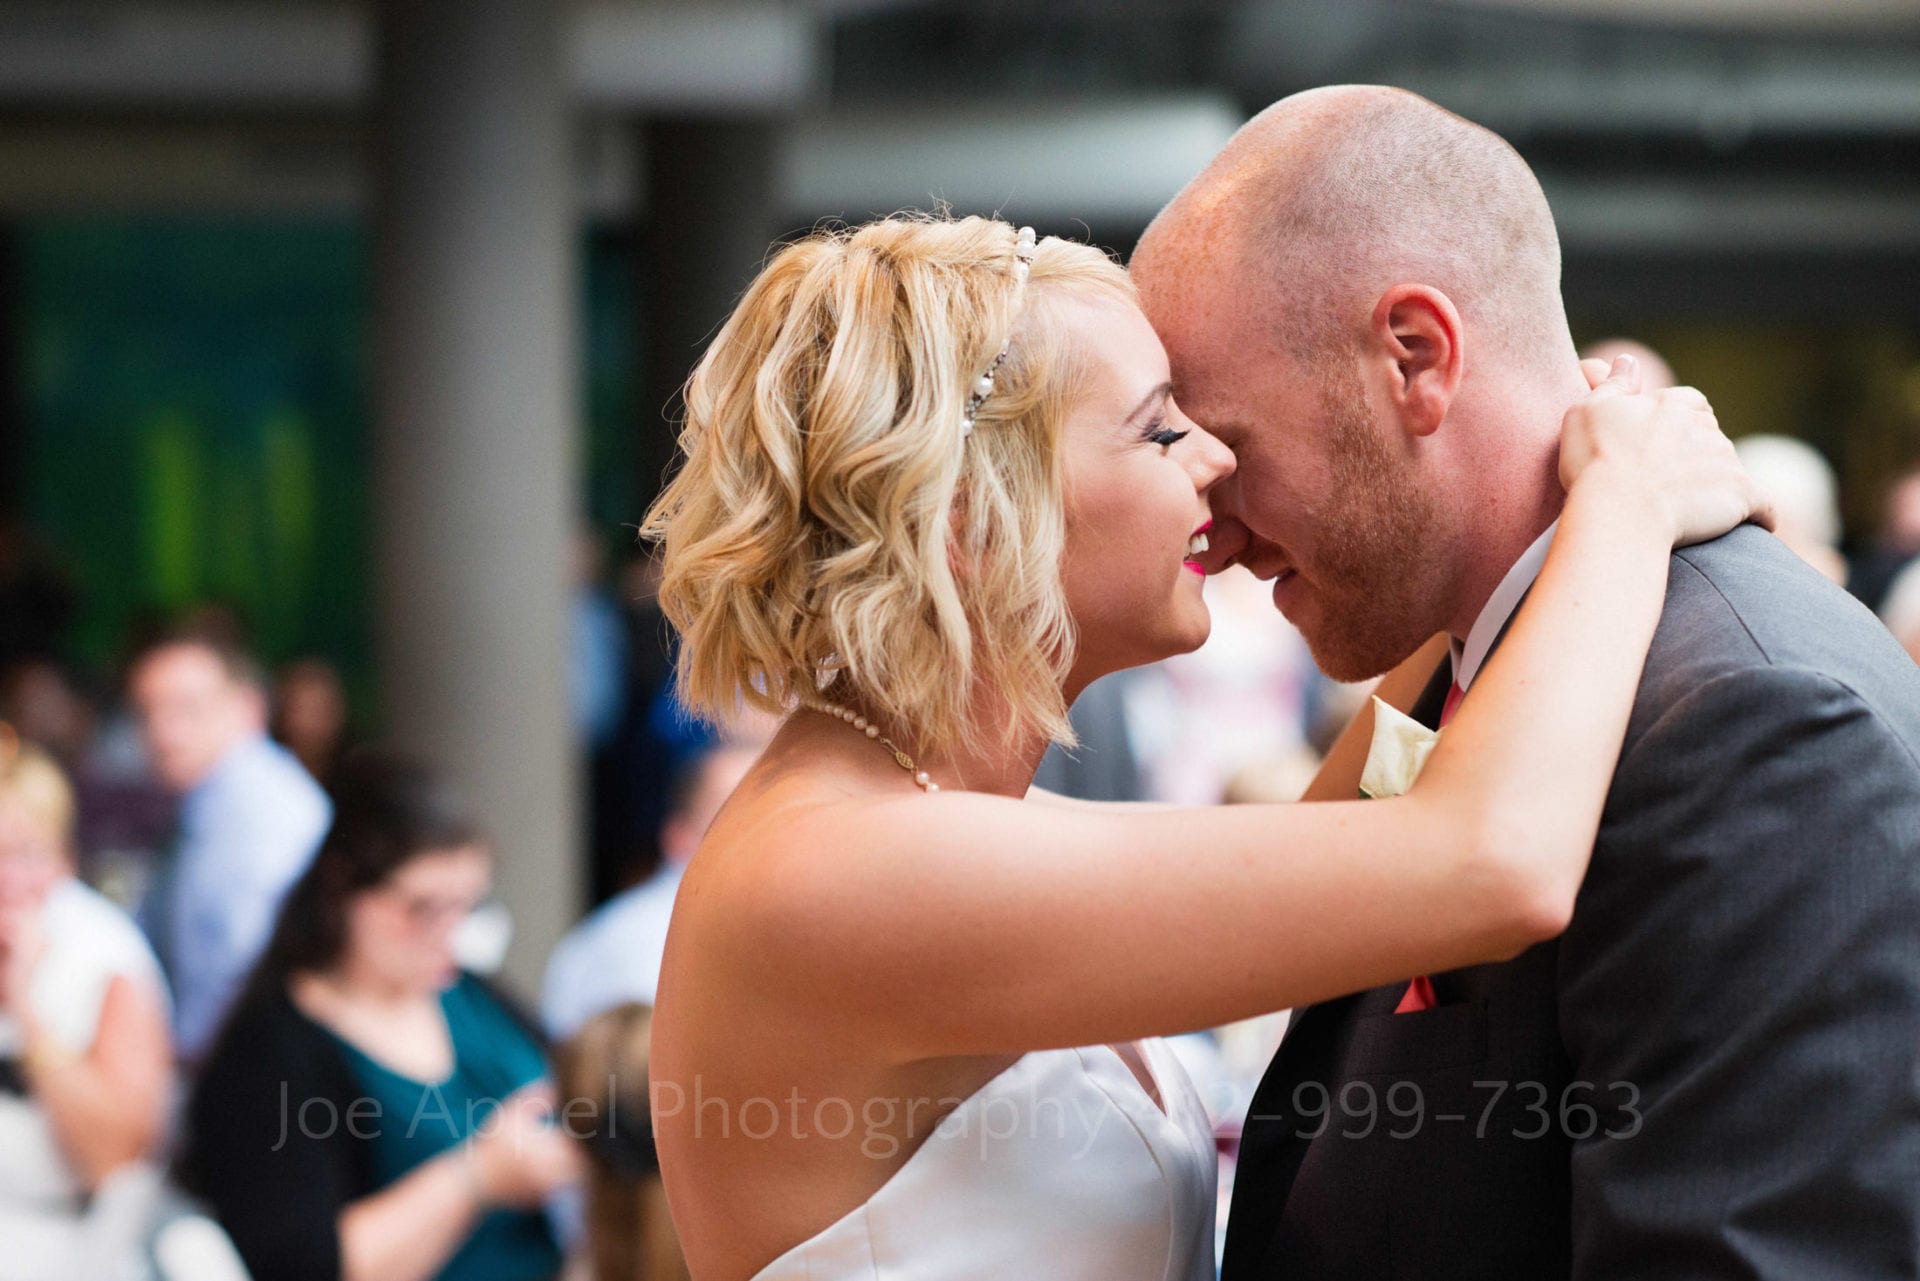 A blonde bride smiles as she has her hands around the neck of her groom.